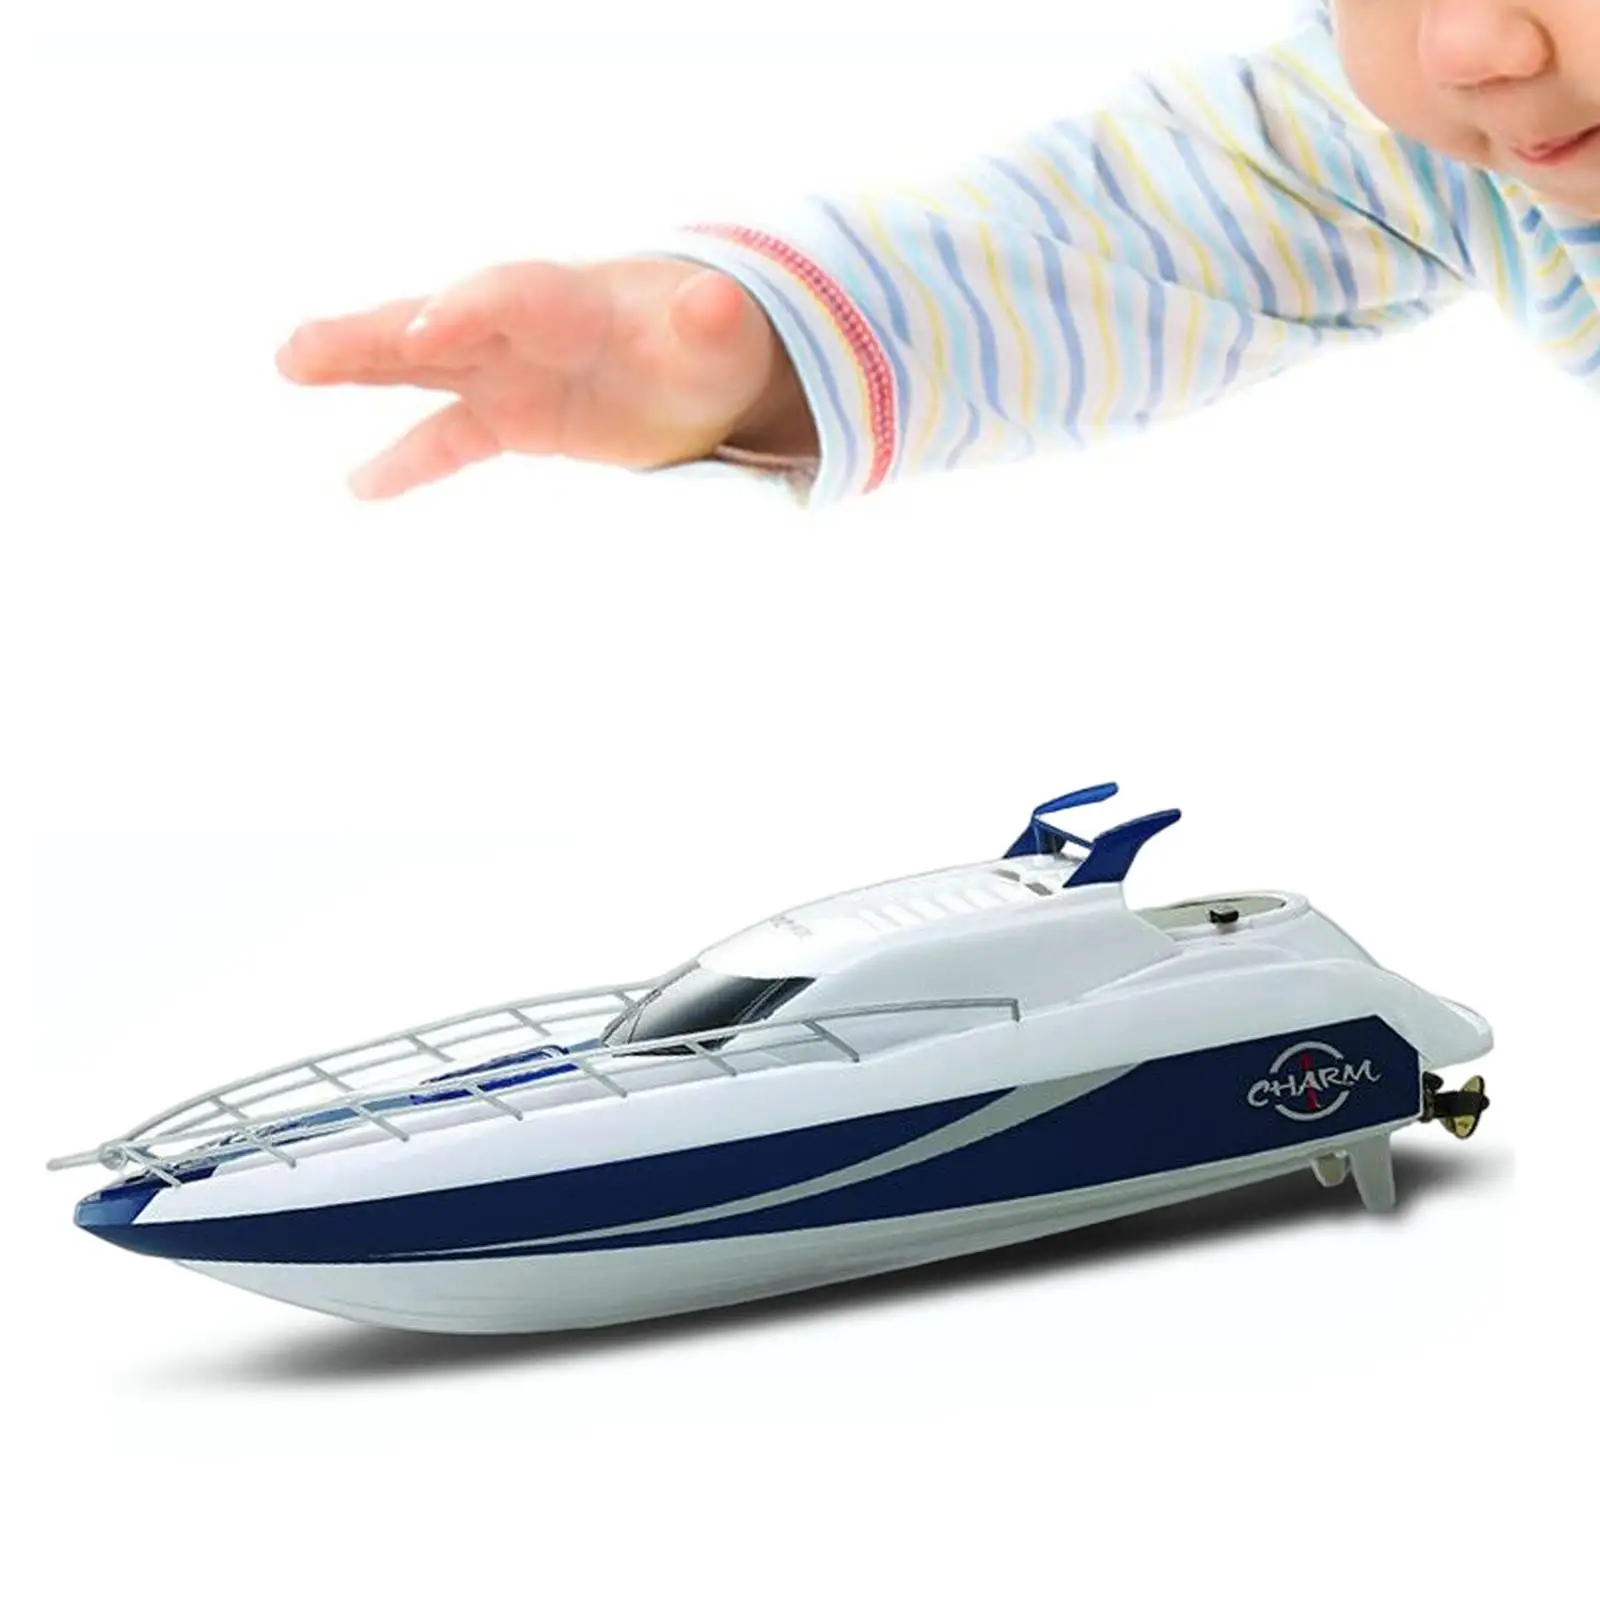 Portable Remote Control Boat Toy USB Rechargeable for Adults Children Girls